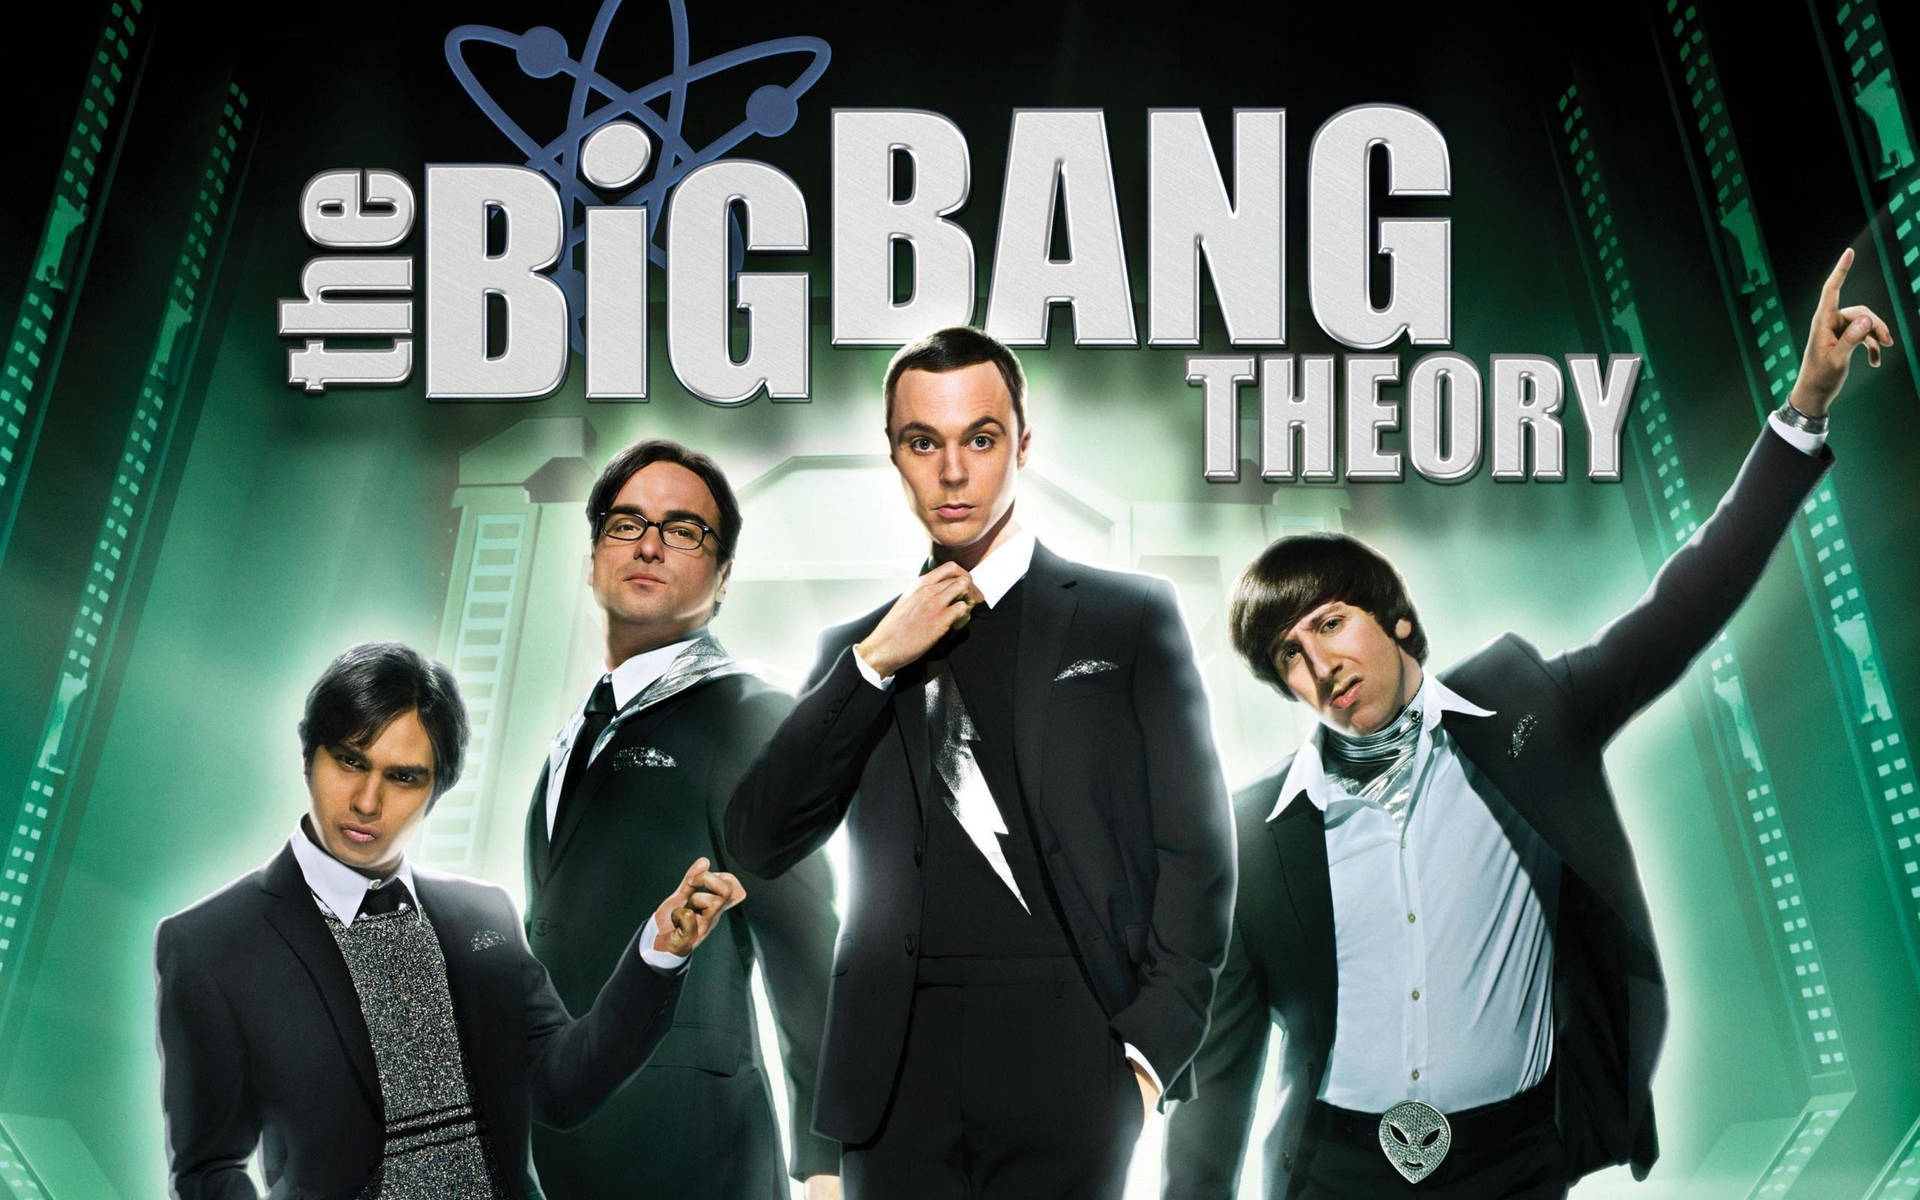 The Big Bang Theory Glowing Green Background